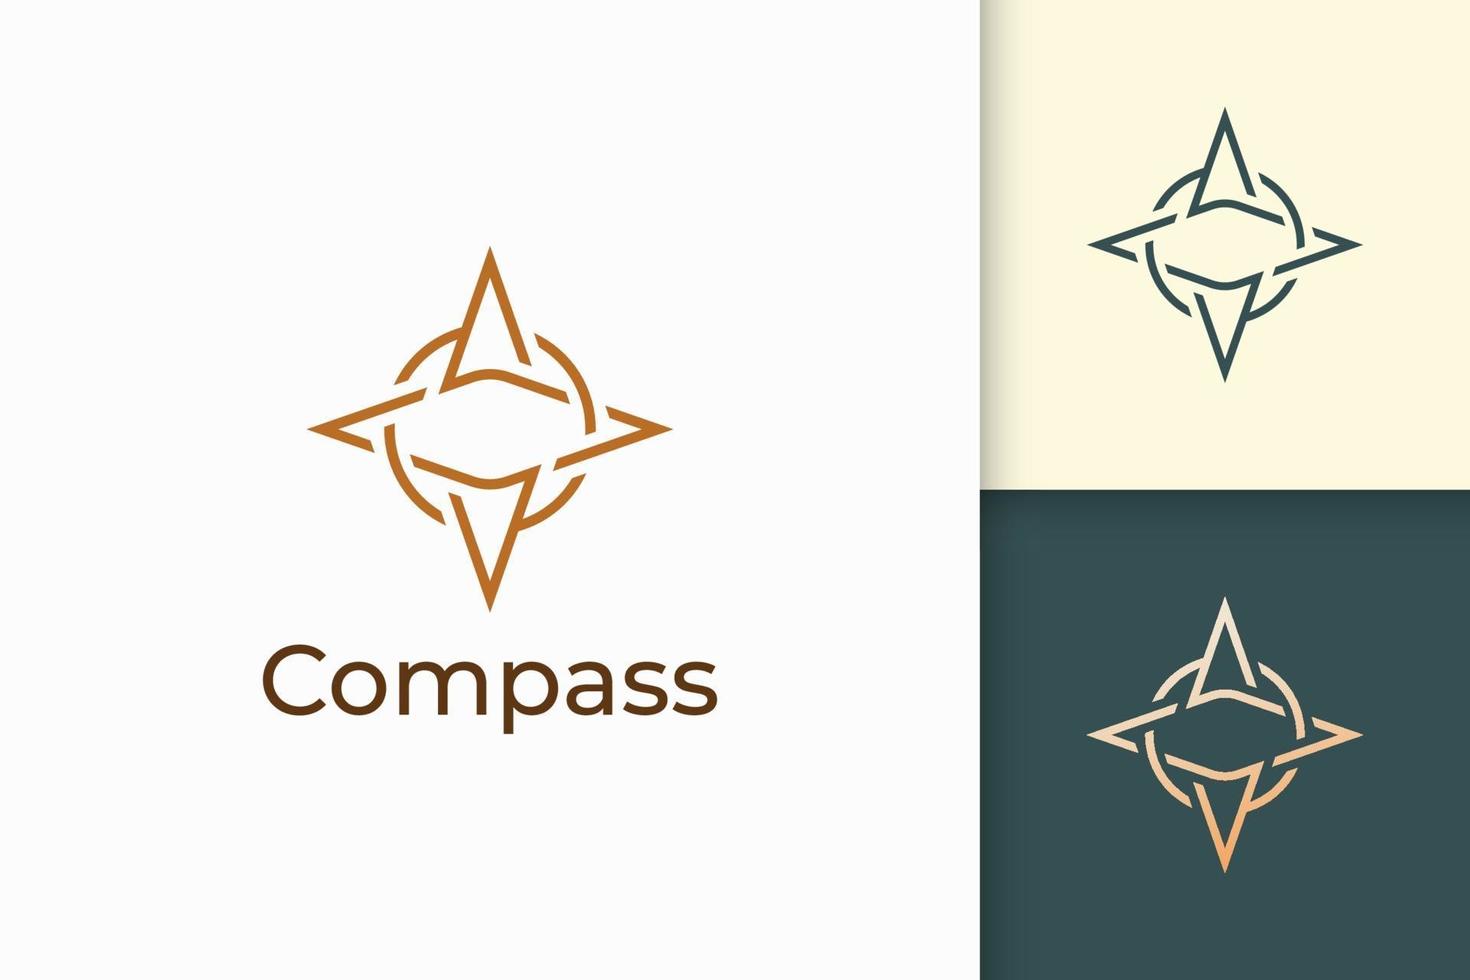 Compass logo in simple shape for outdoor business or community vector